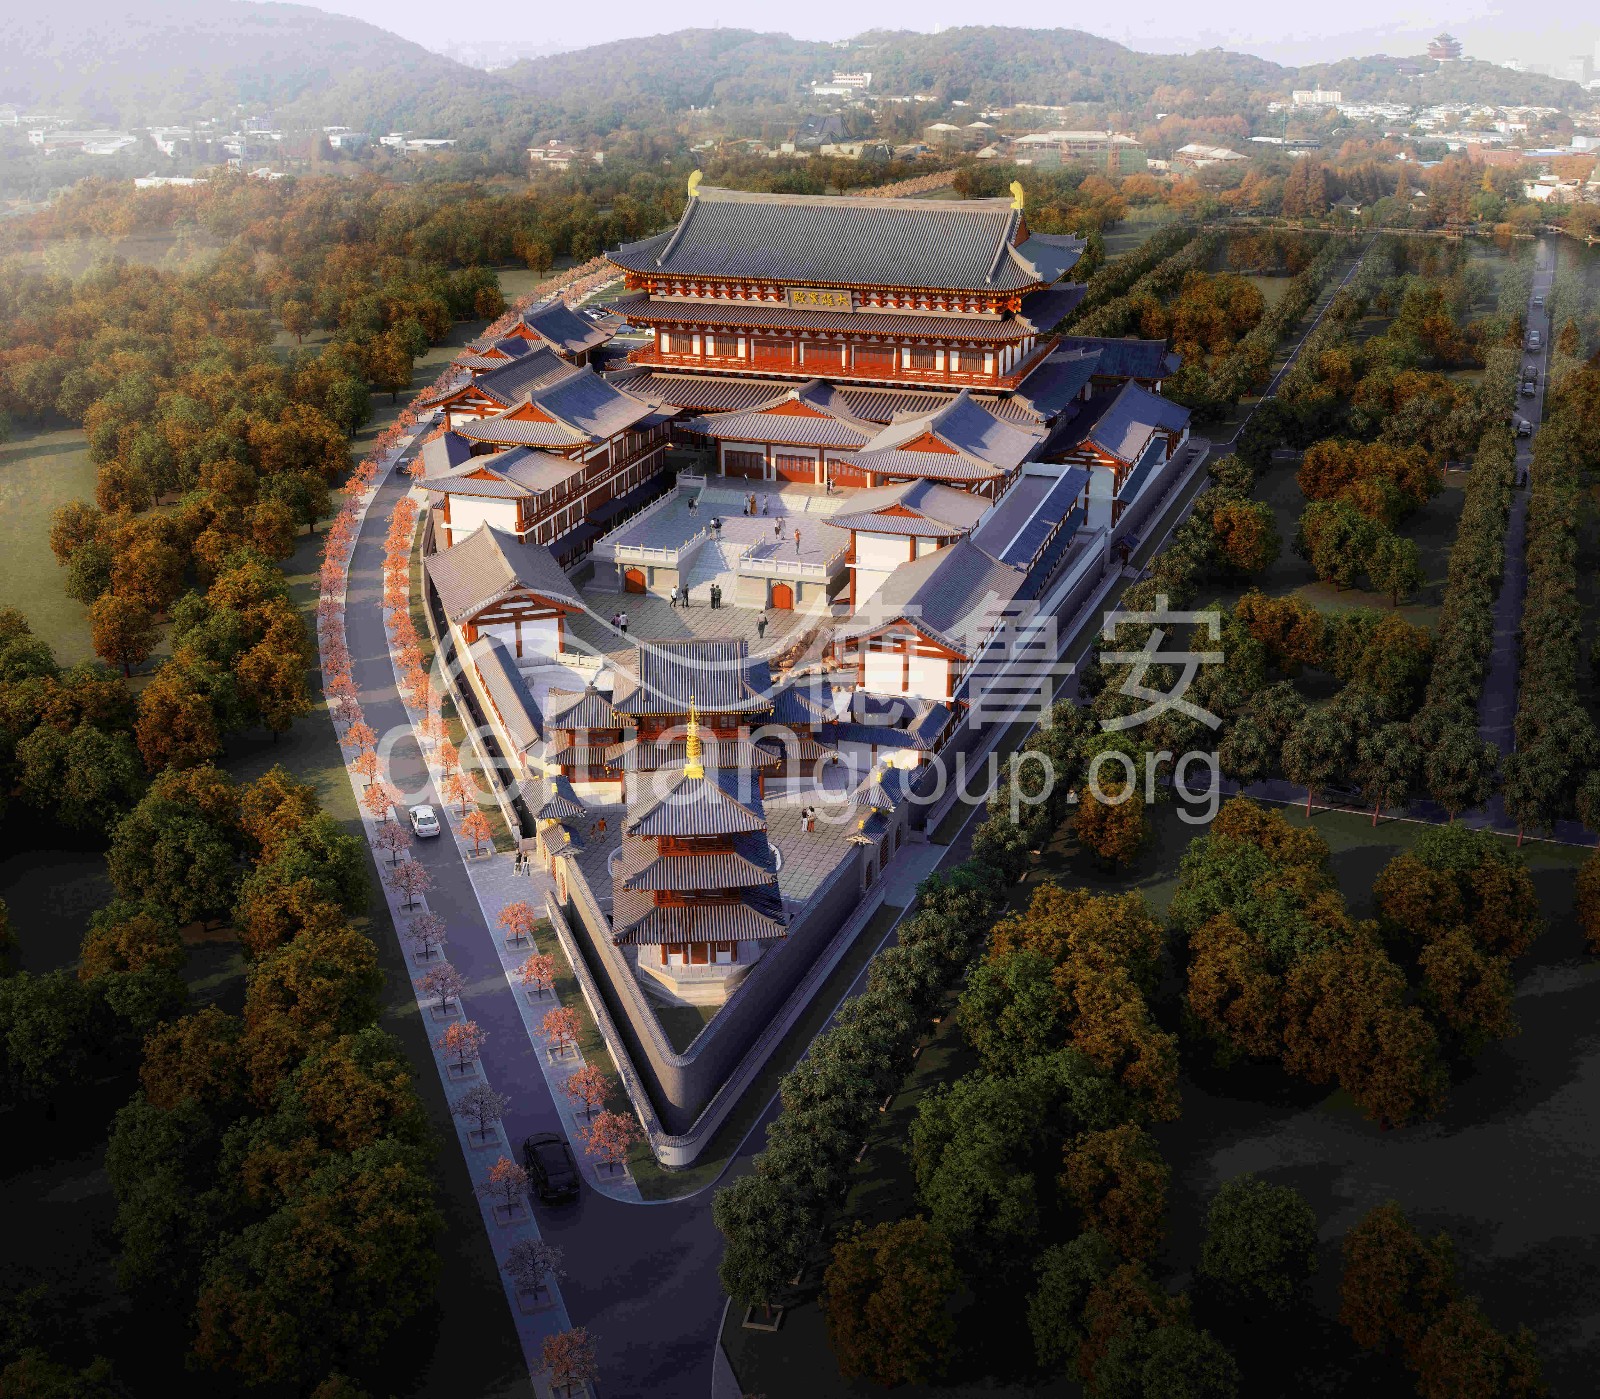 Planning and design of Baoqing temple in Xianghe0(图13)